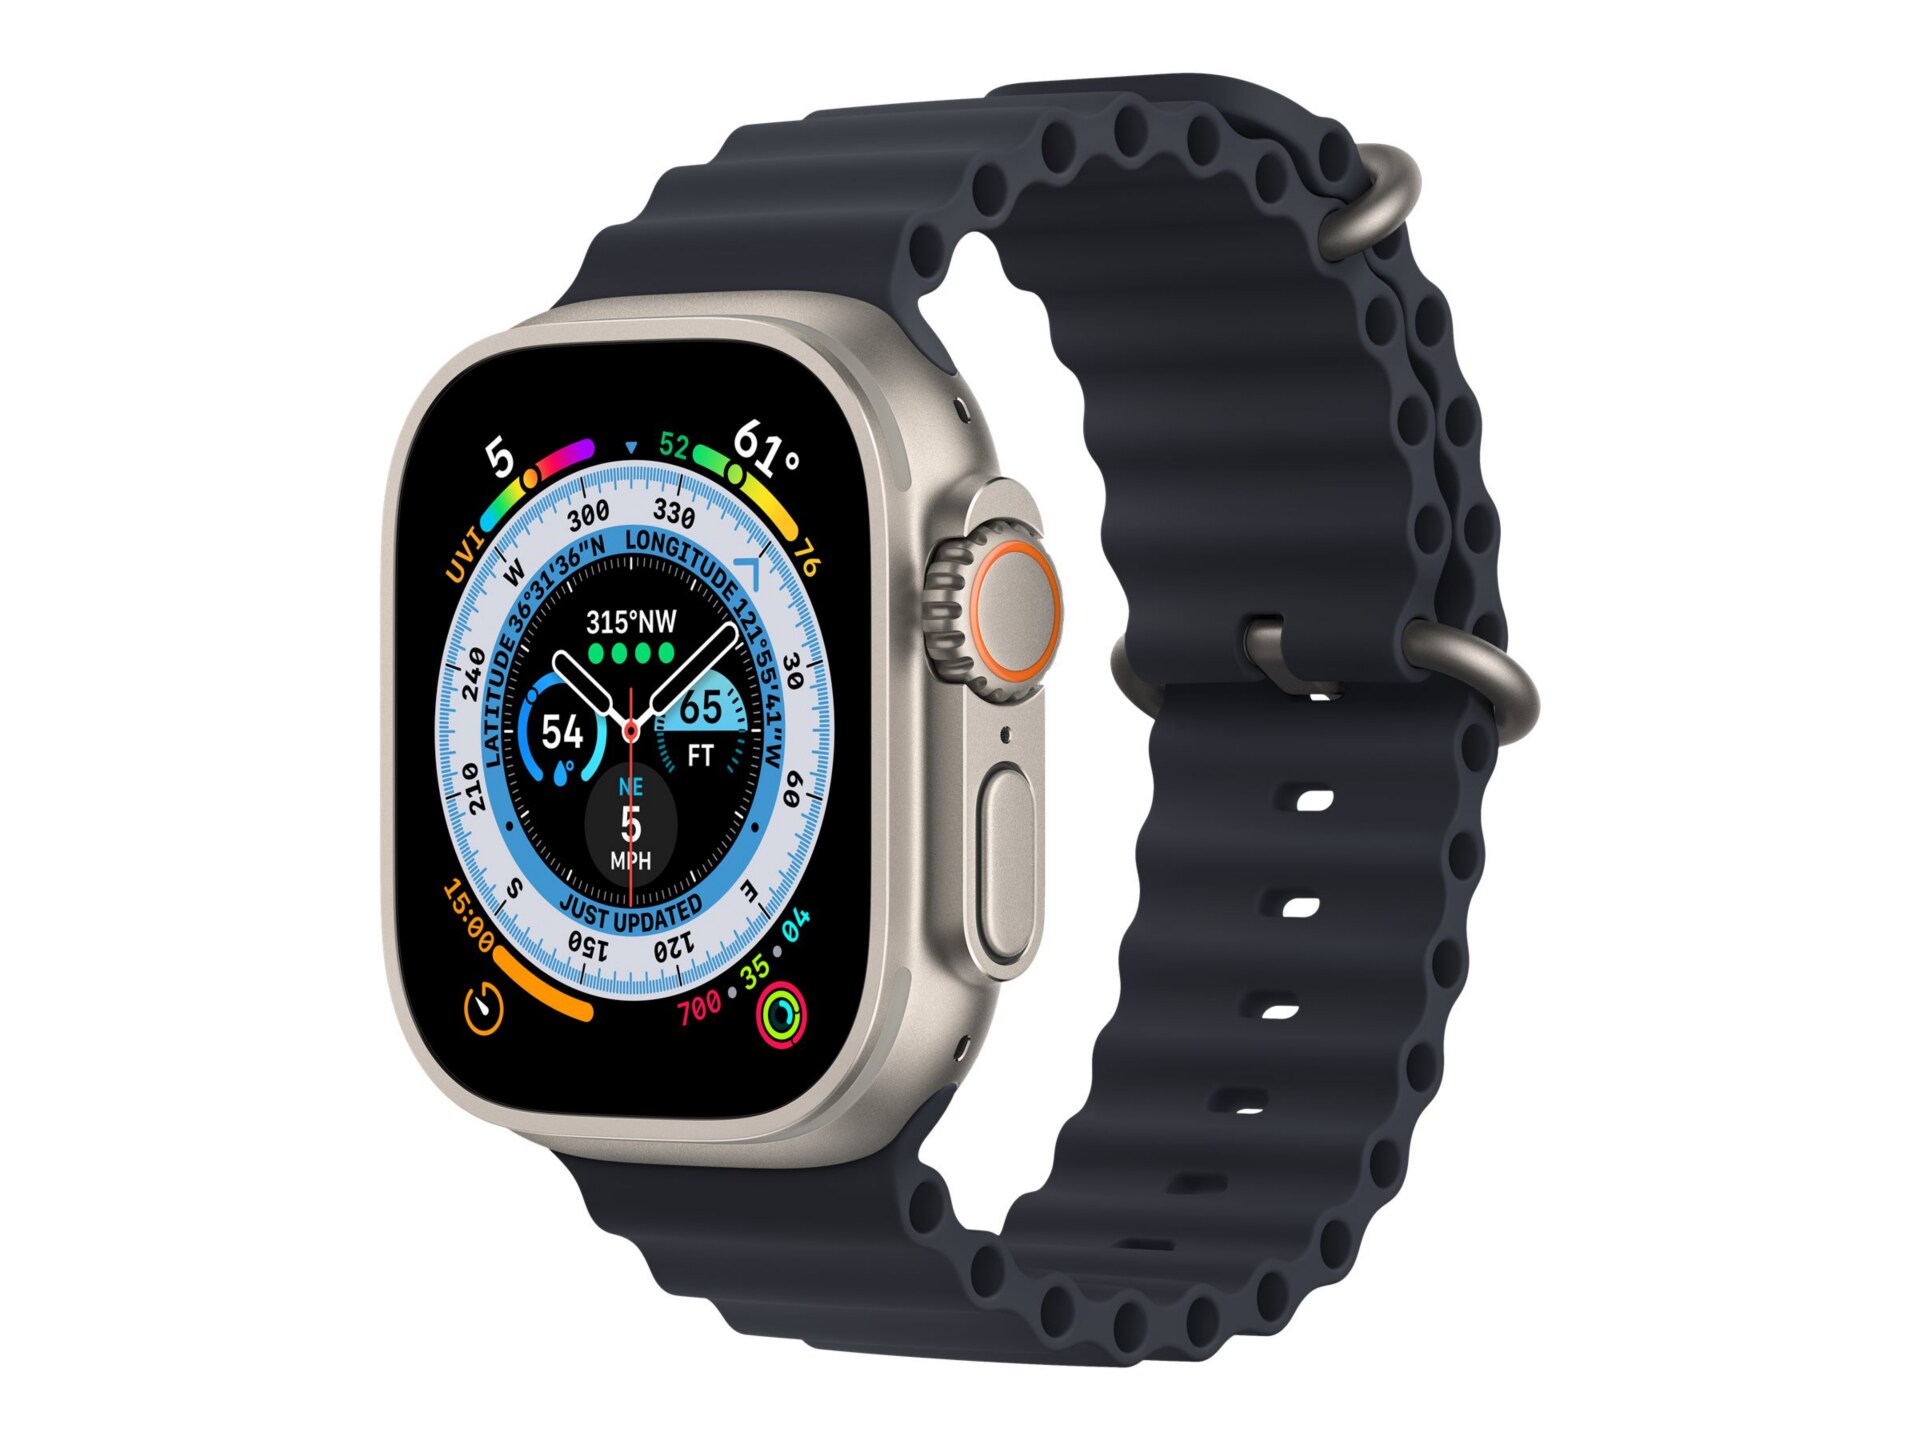 Tilbageholdenhed Repræsentere Universitet Apple Watch Ultra - titanium - smart watch with Ocean band - midnight - 32  GB - MQET3LL/A - Smartwatches - CDW.com